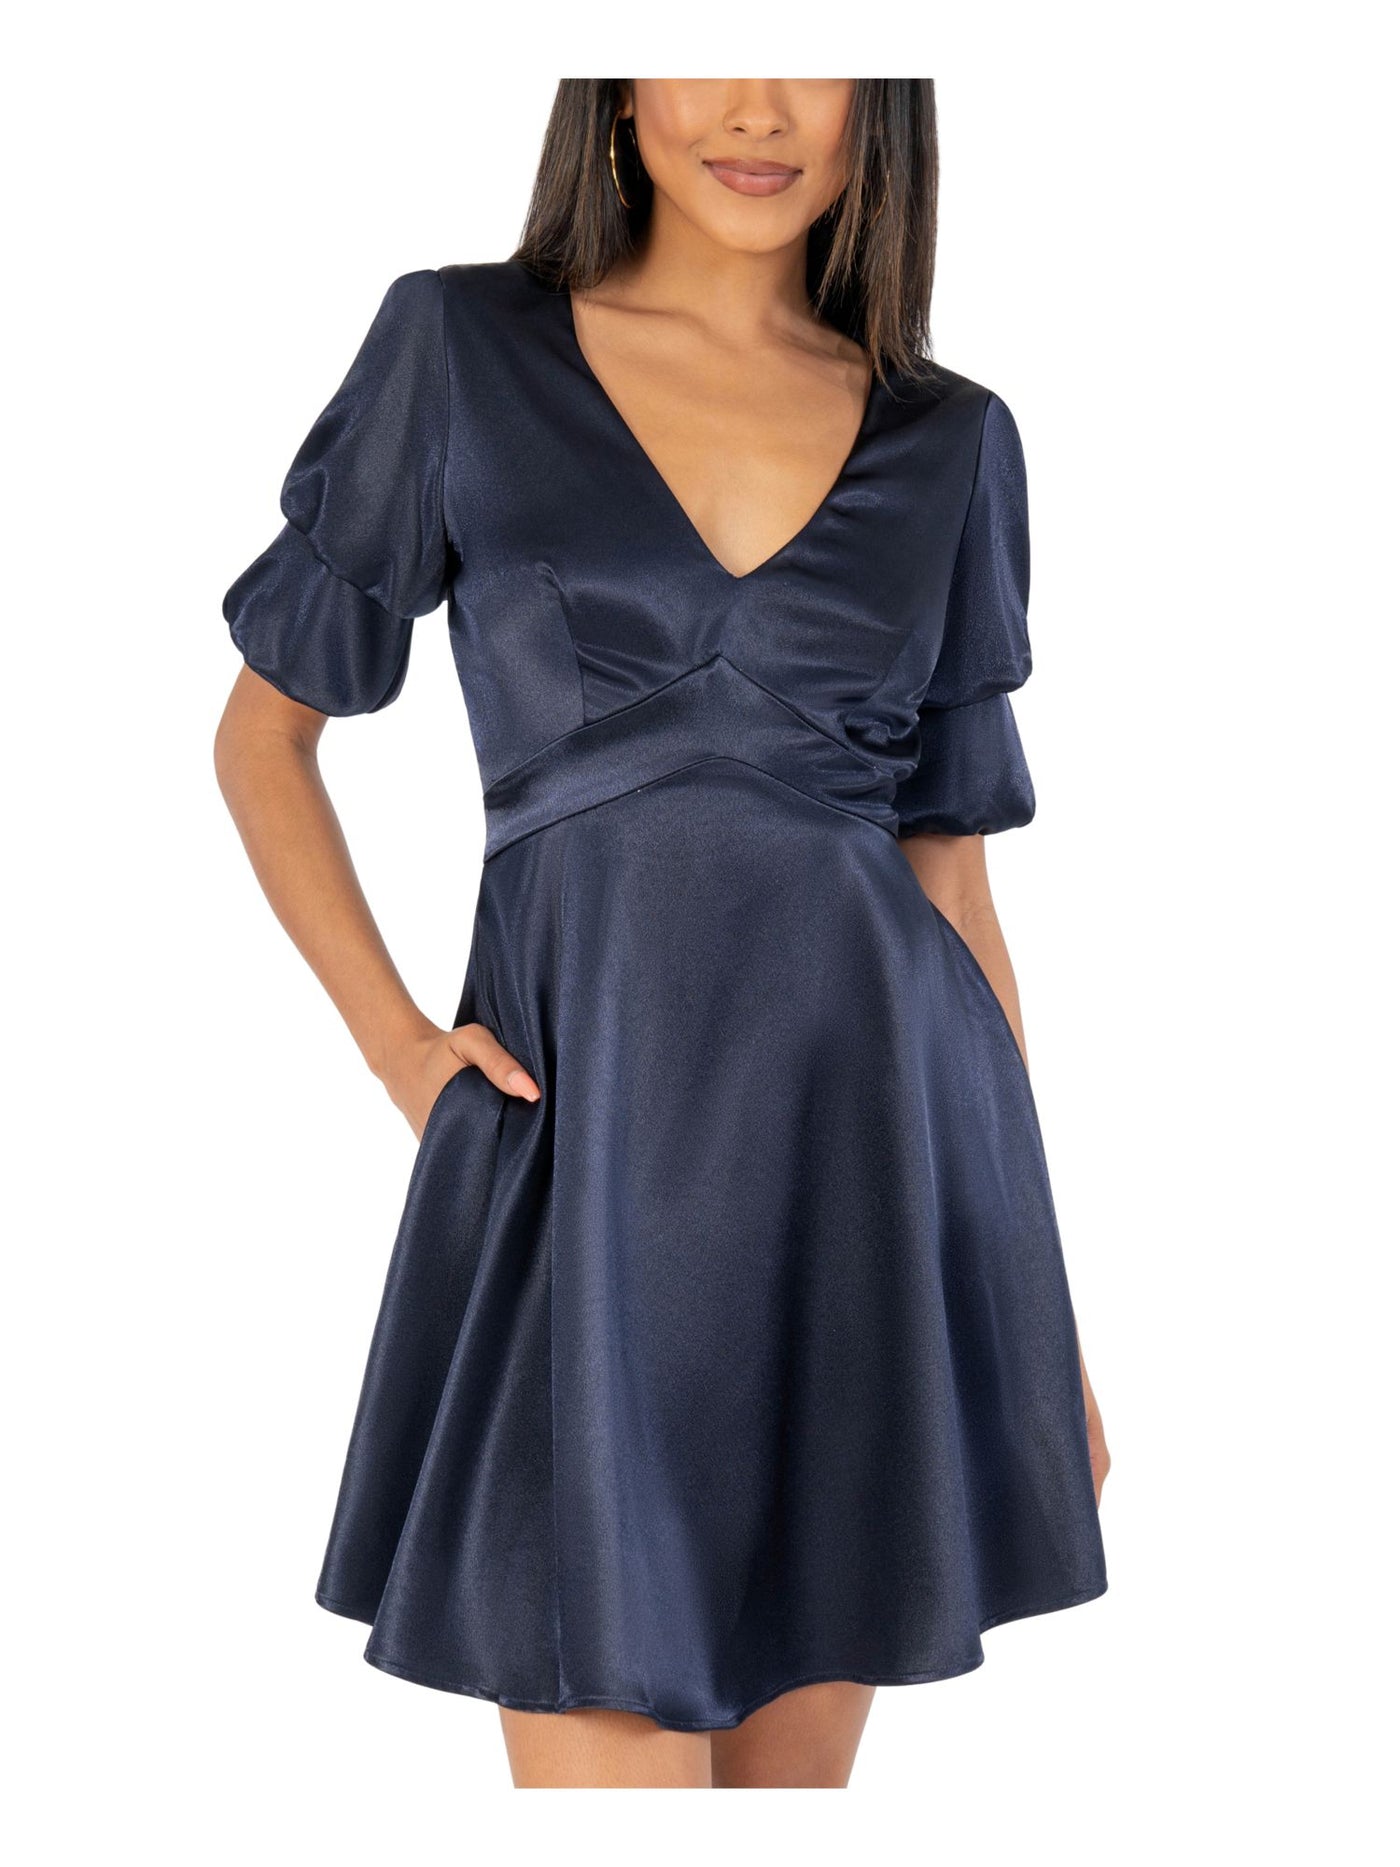 SPEECHLESS Womens Navy Stretch Darted Lined Pouf Sleeve V Neck Short Party Fit + Flare Dress Juniors 13